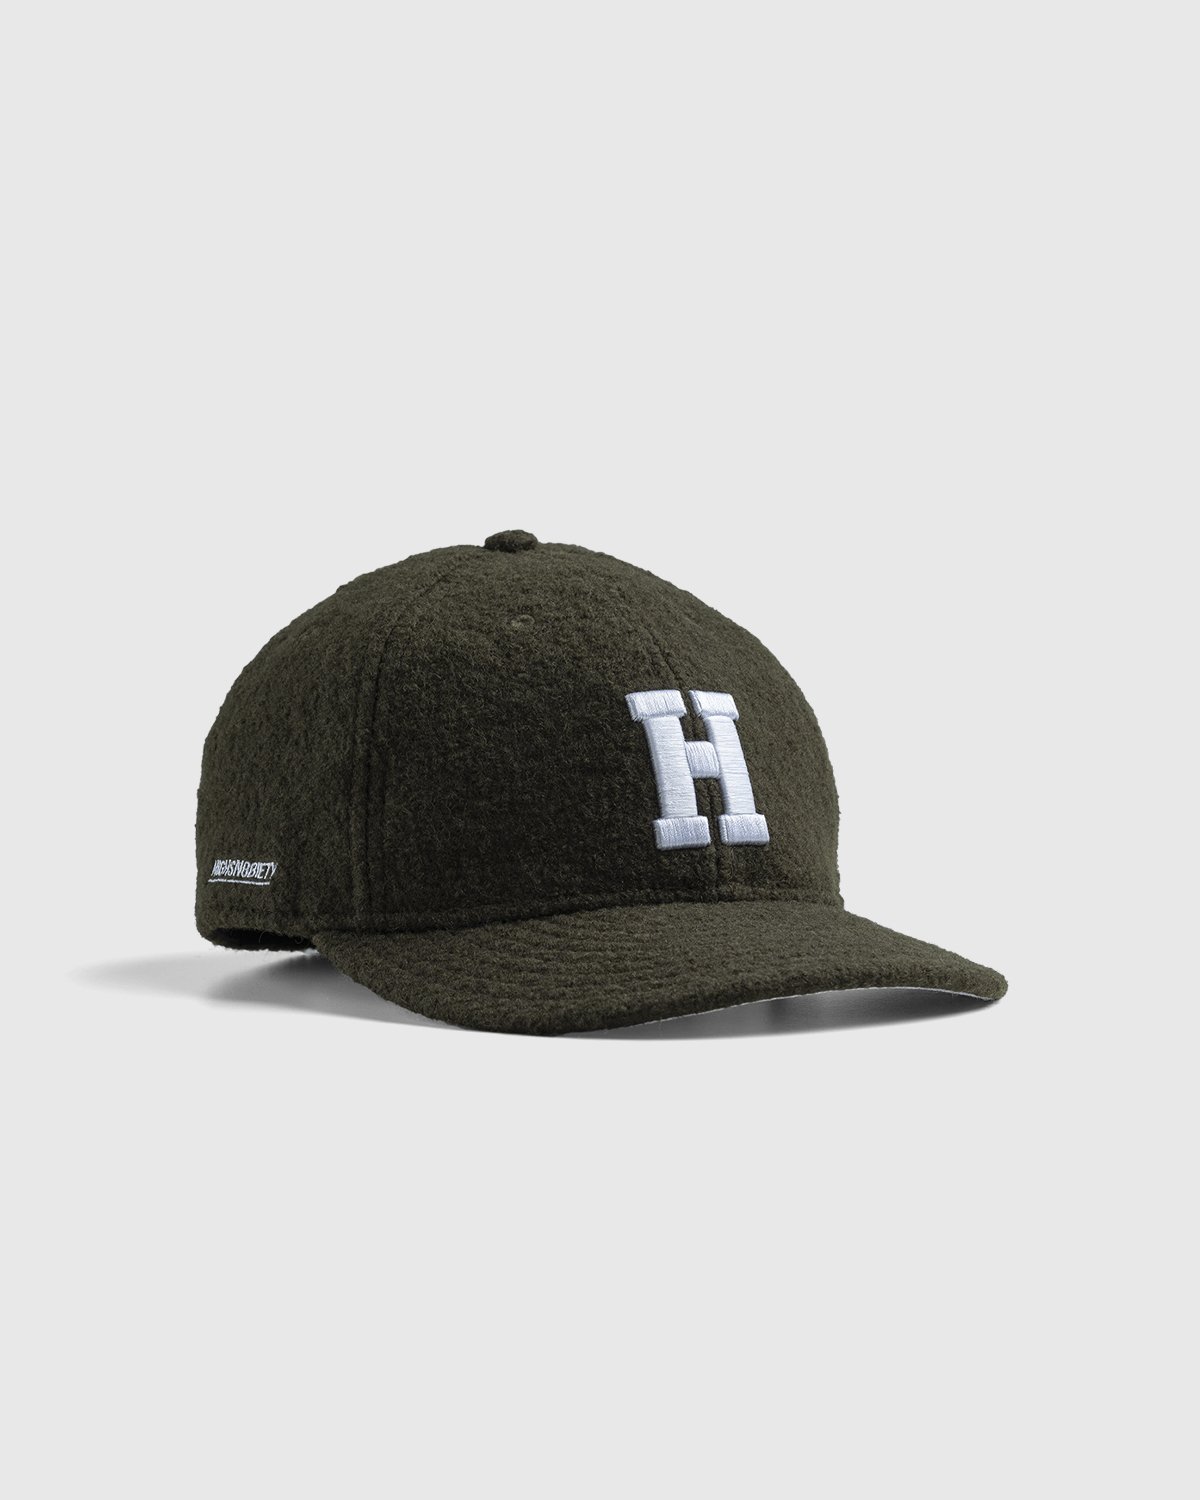 New Era x Highsnobiety - 59Fifty Forest Green - Accessories - Green - Image 1